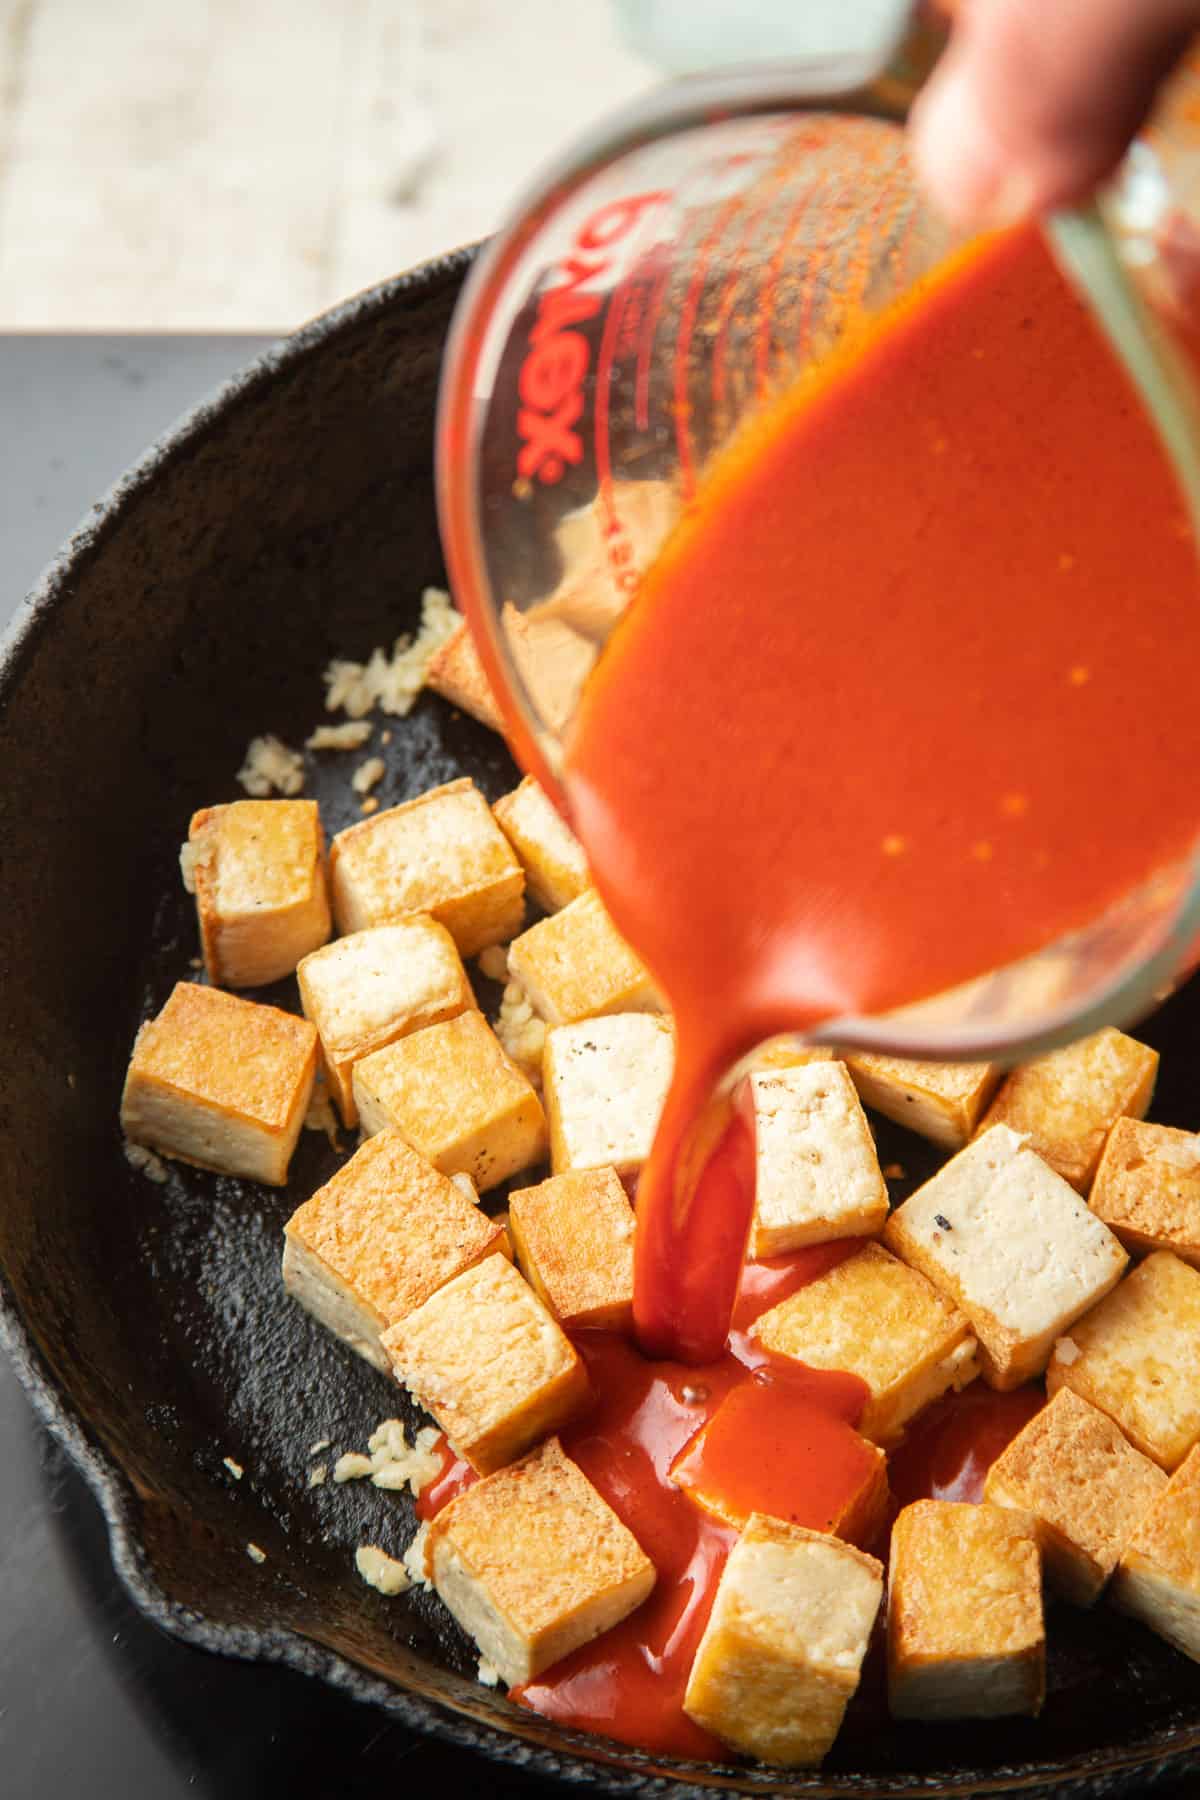 Hand pouring gochujang sauce into a skillet of tofu.